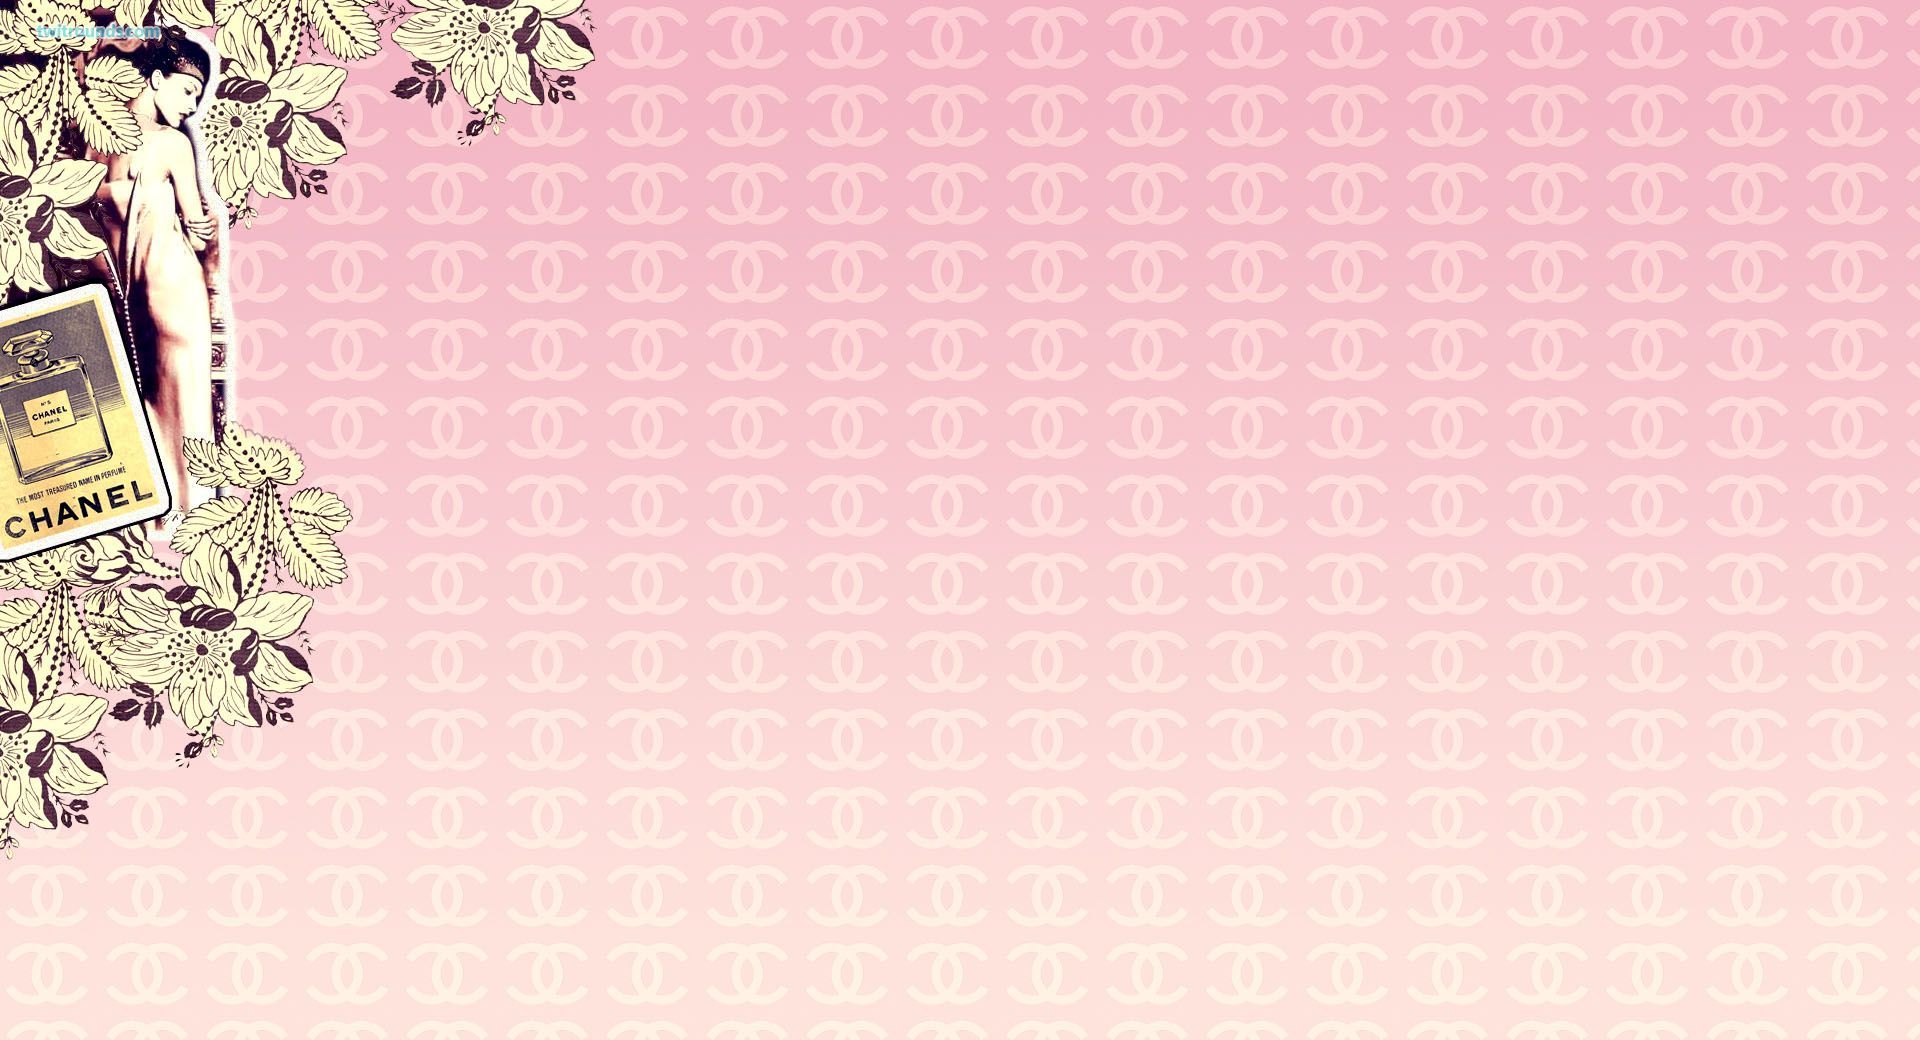 Coco Chanel Wallpaper > Chanel Pink Background Wallpaper & Background Download